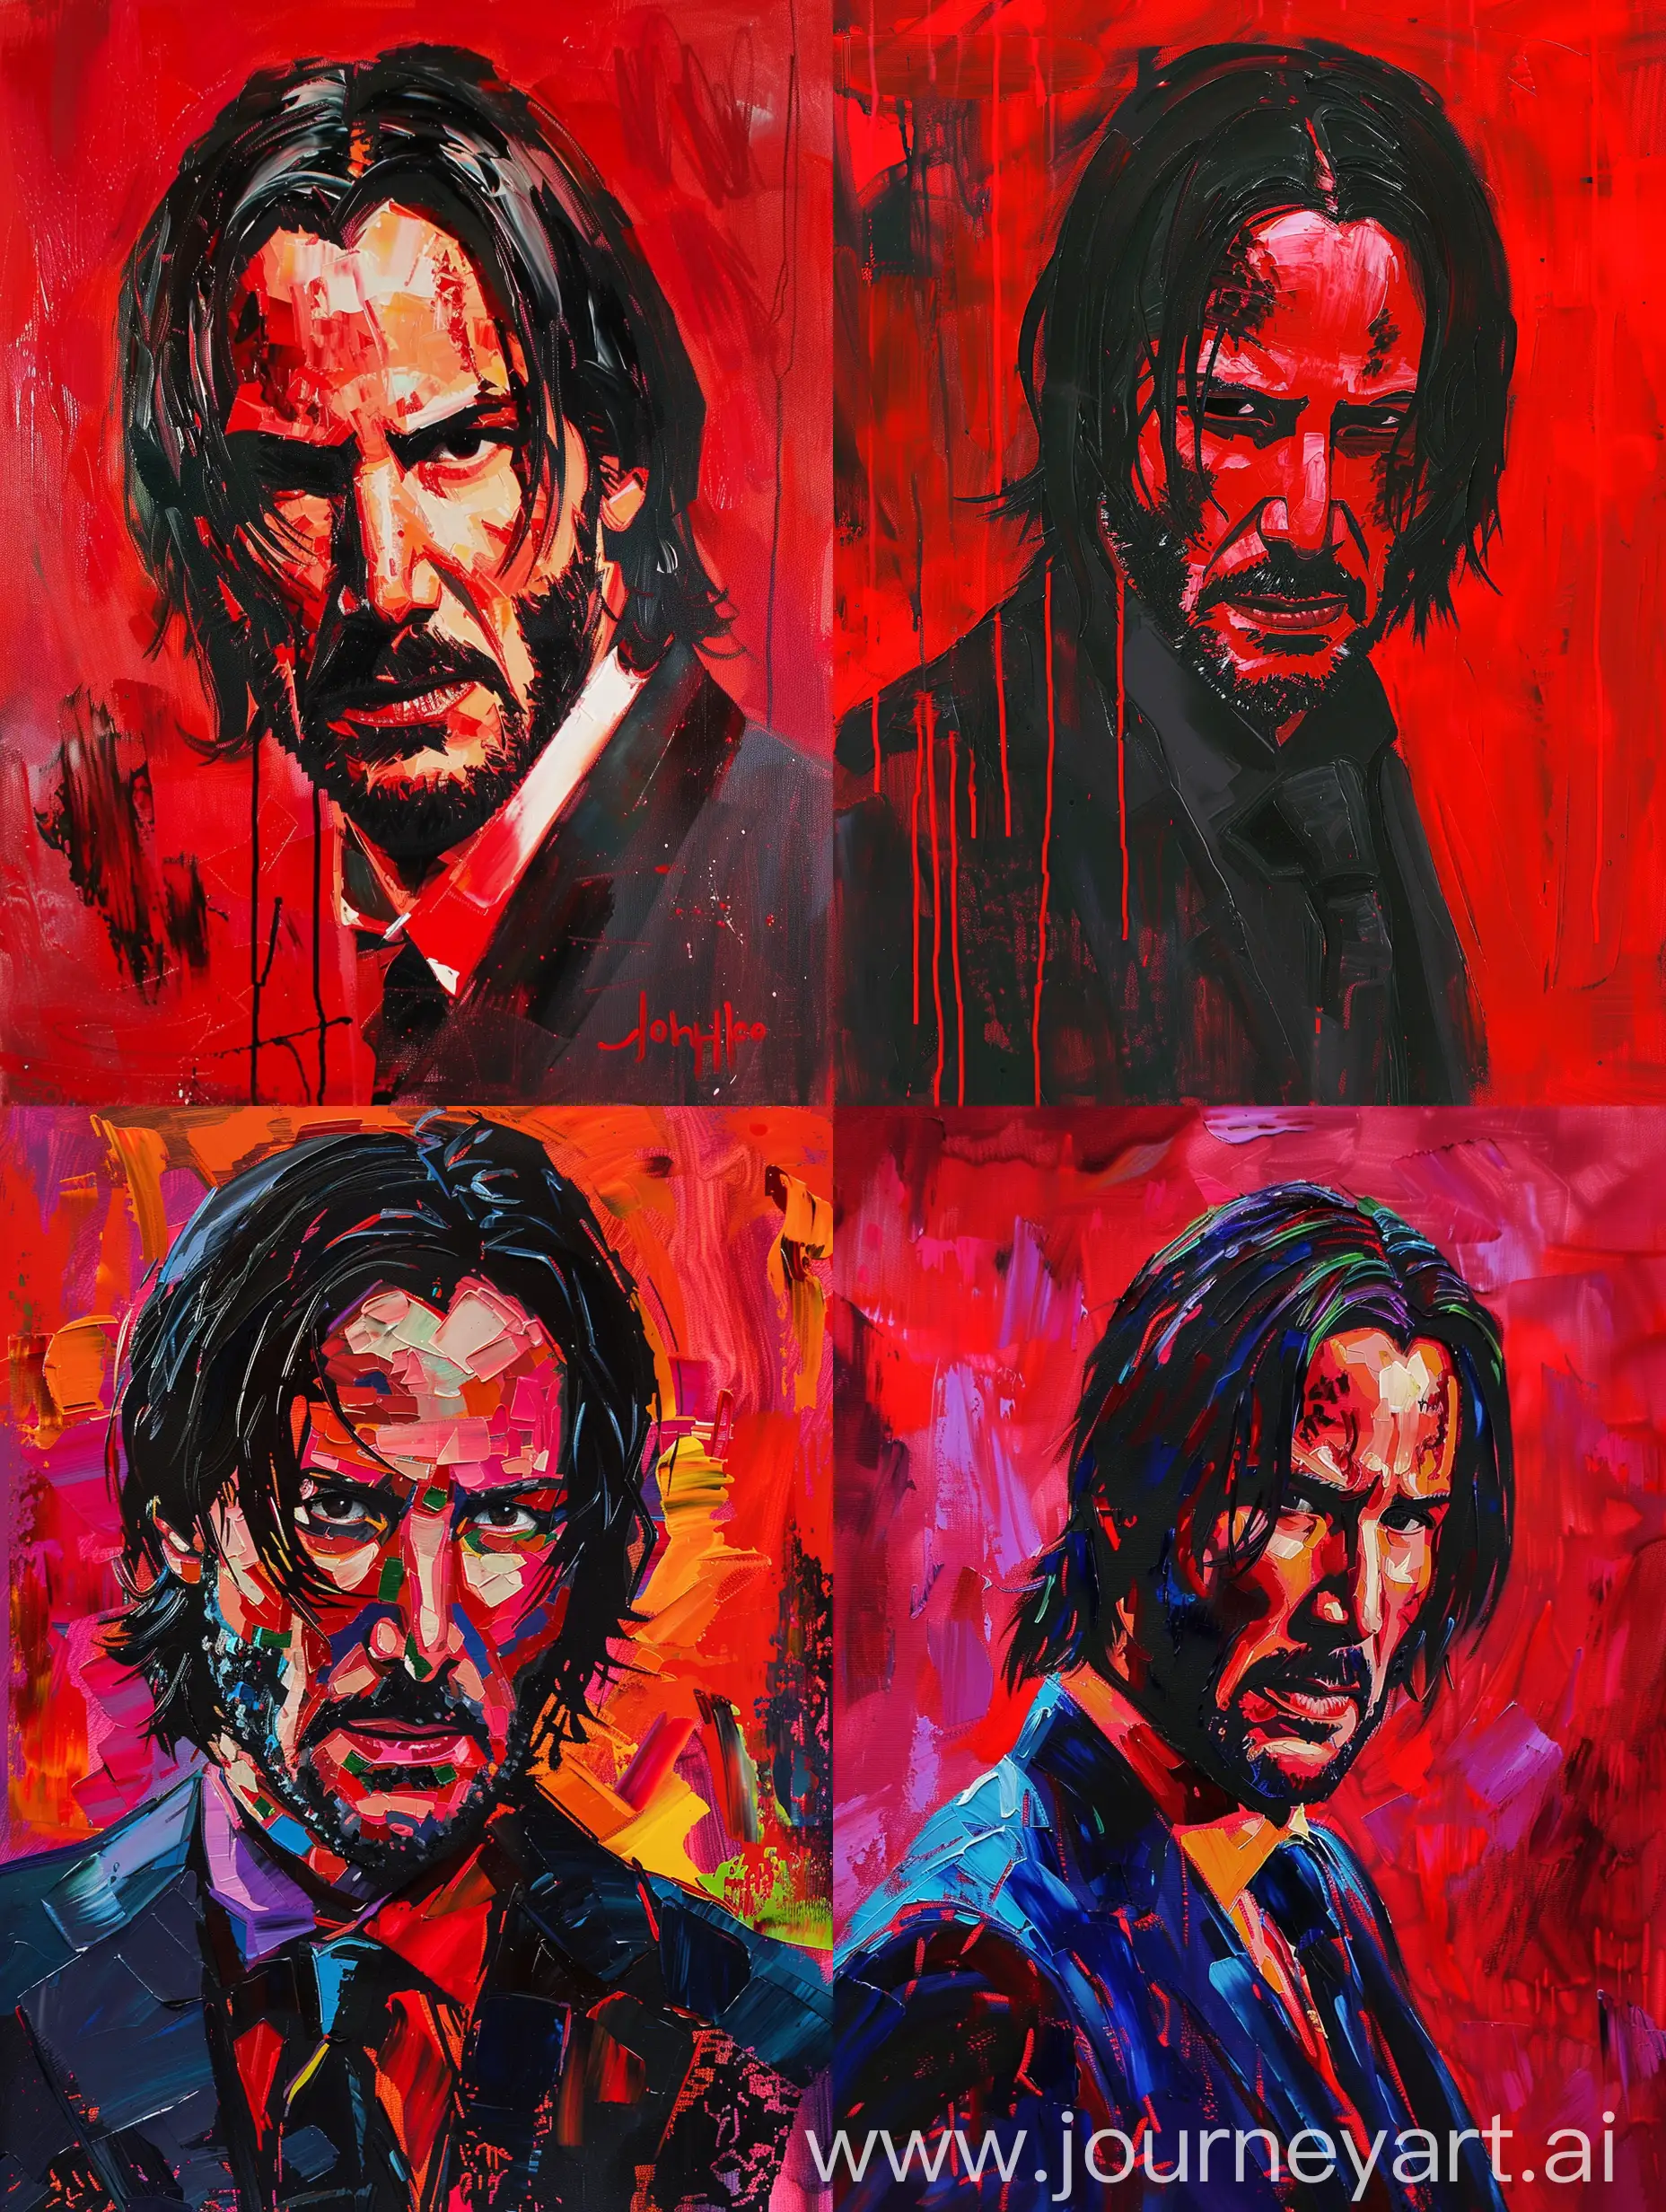 John-Wick-Inspired-Oil-Painting-in-Vibrant-Picasso-Style